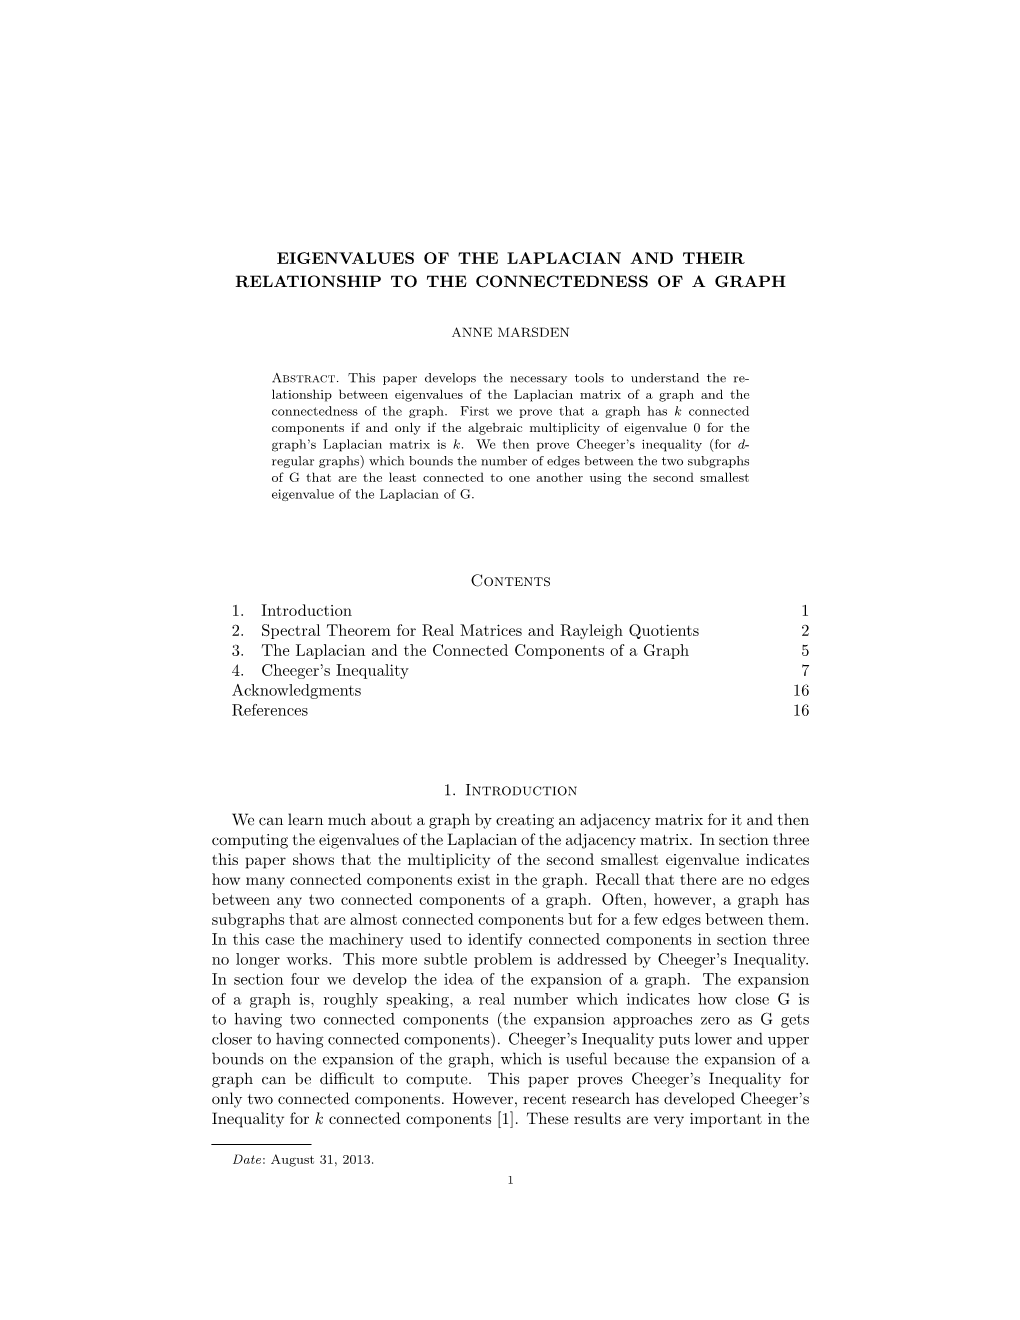 Eigenvalues of the Laplacian and Their Relationship to the Connectedness of a Graph